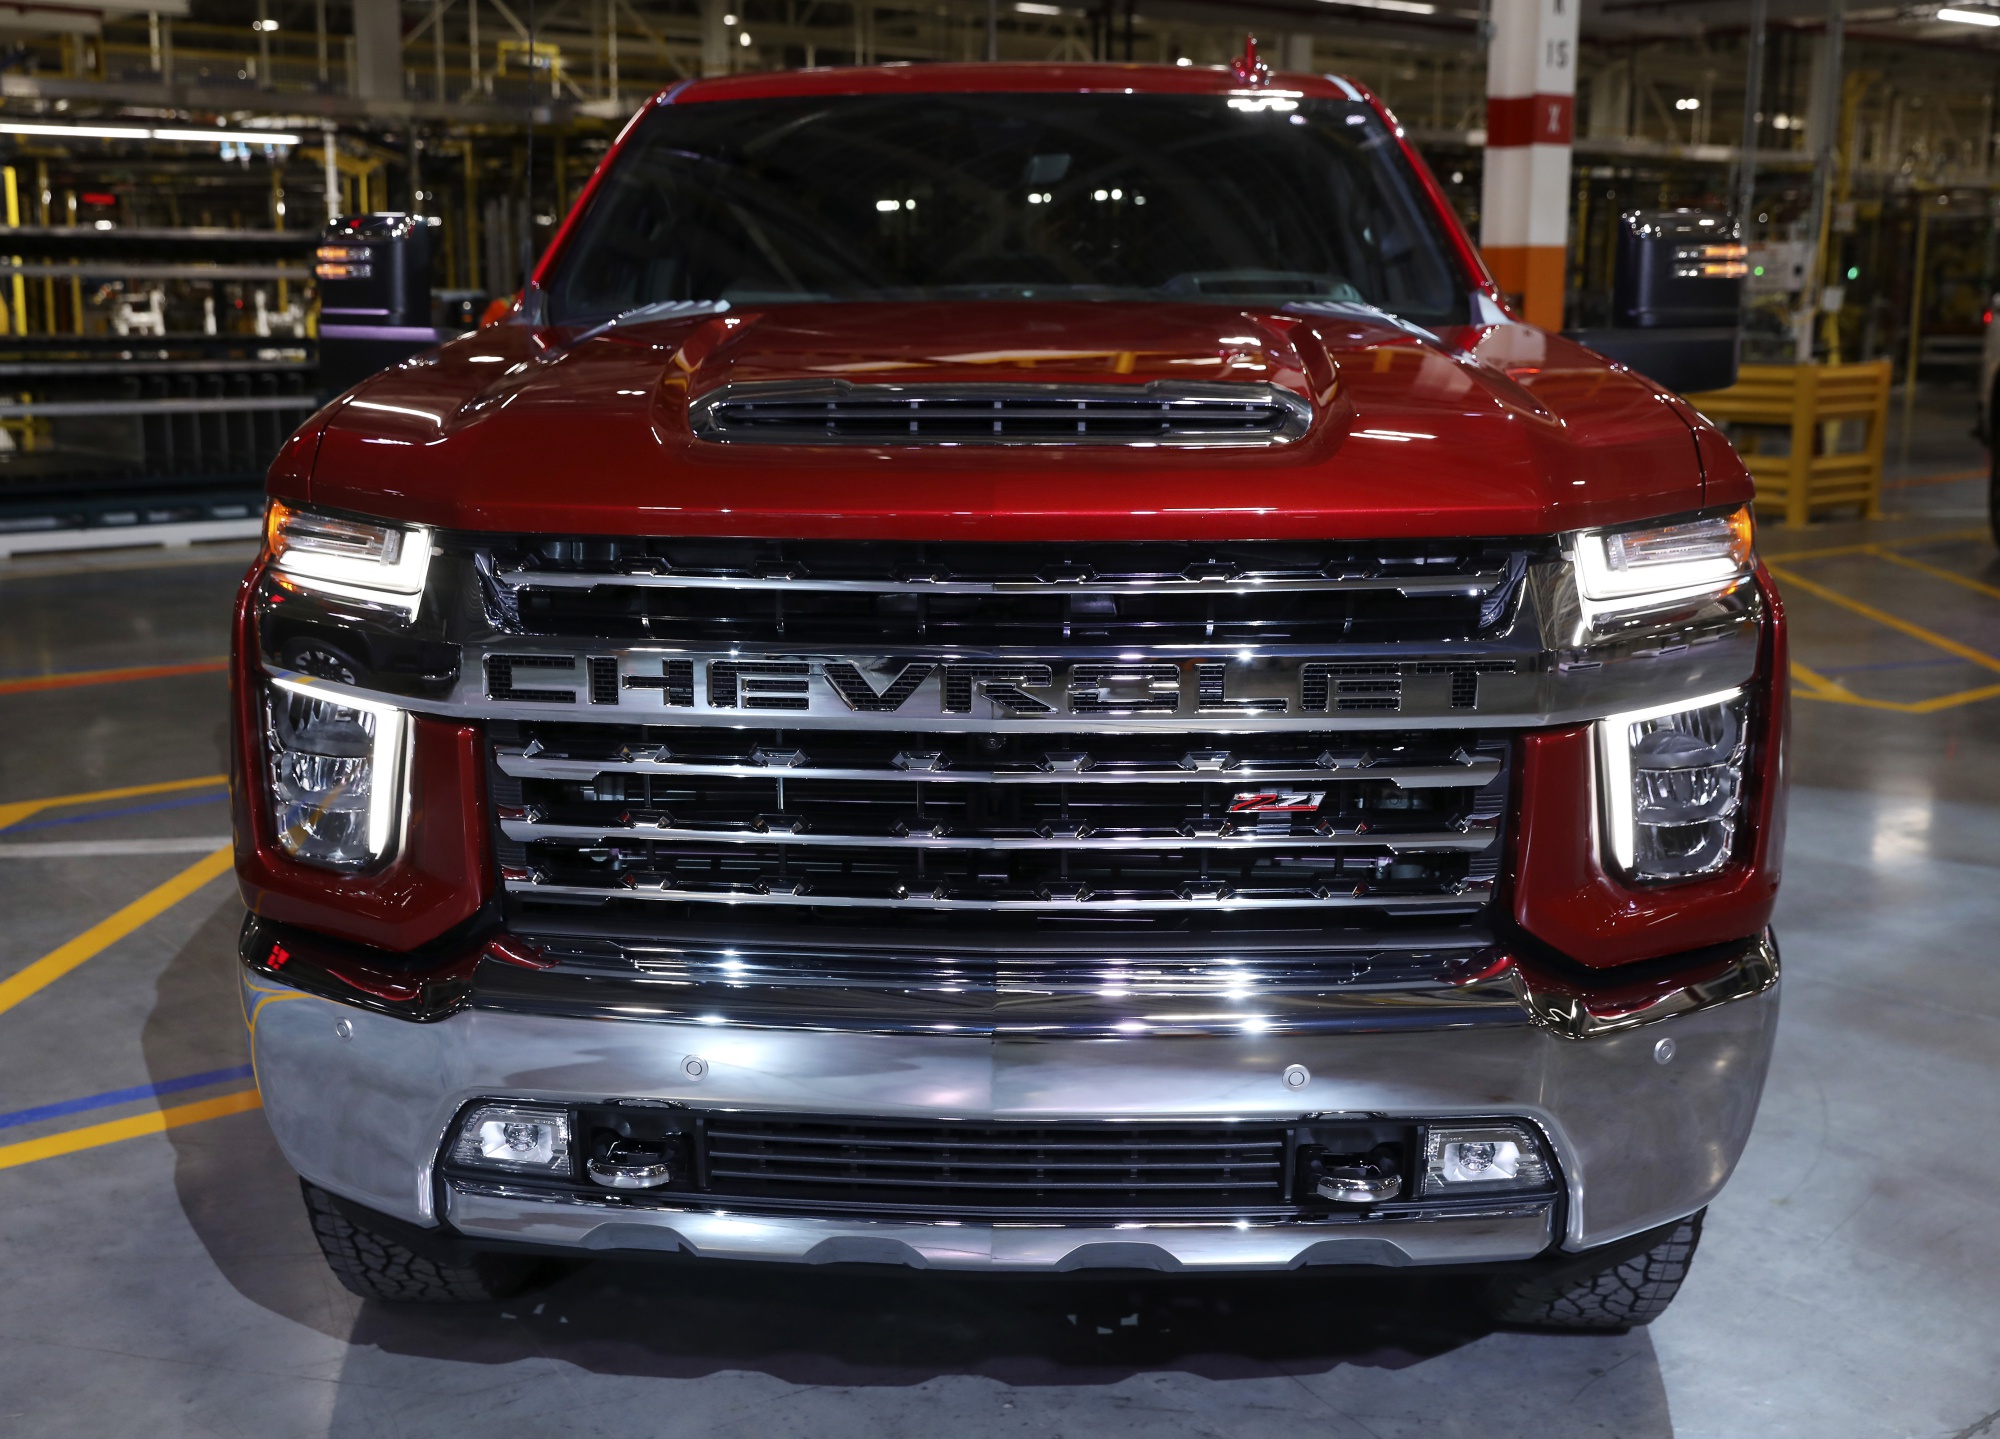 A New Way to Curb the Rise of Oversized Pickups and SUVs - Bloomberg